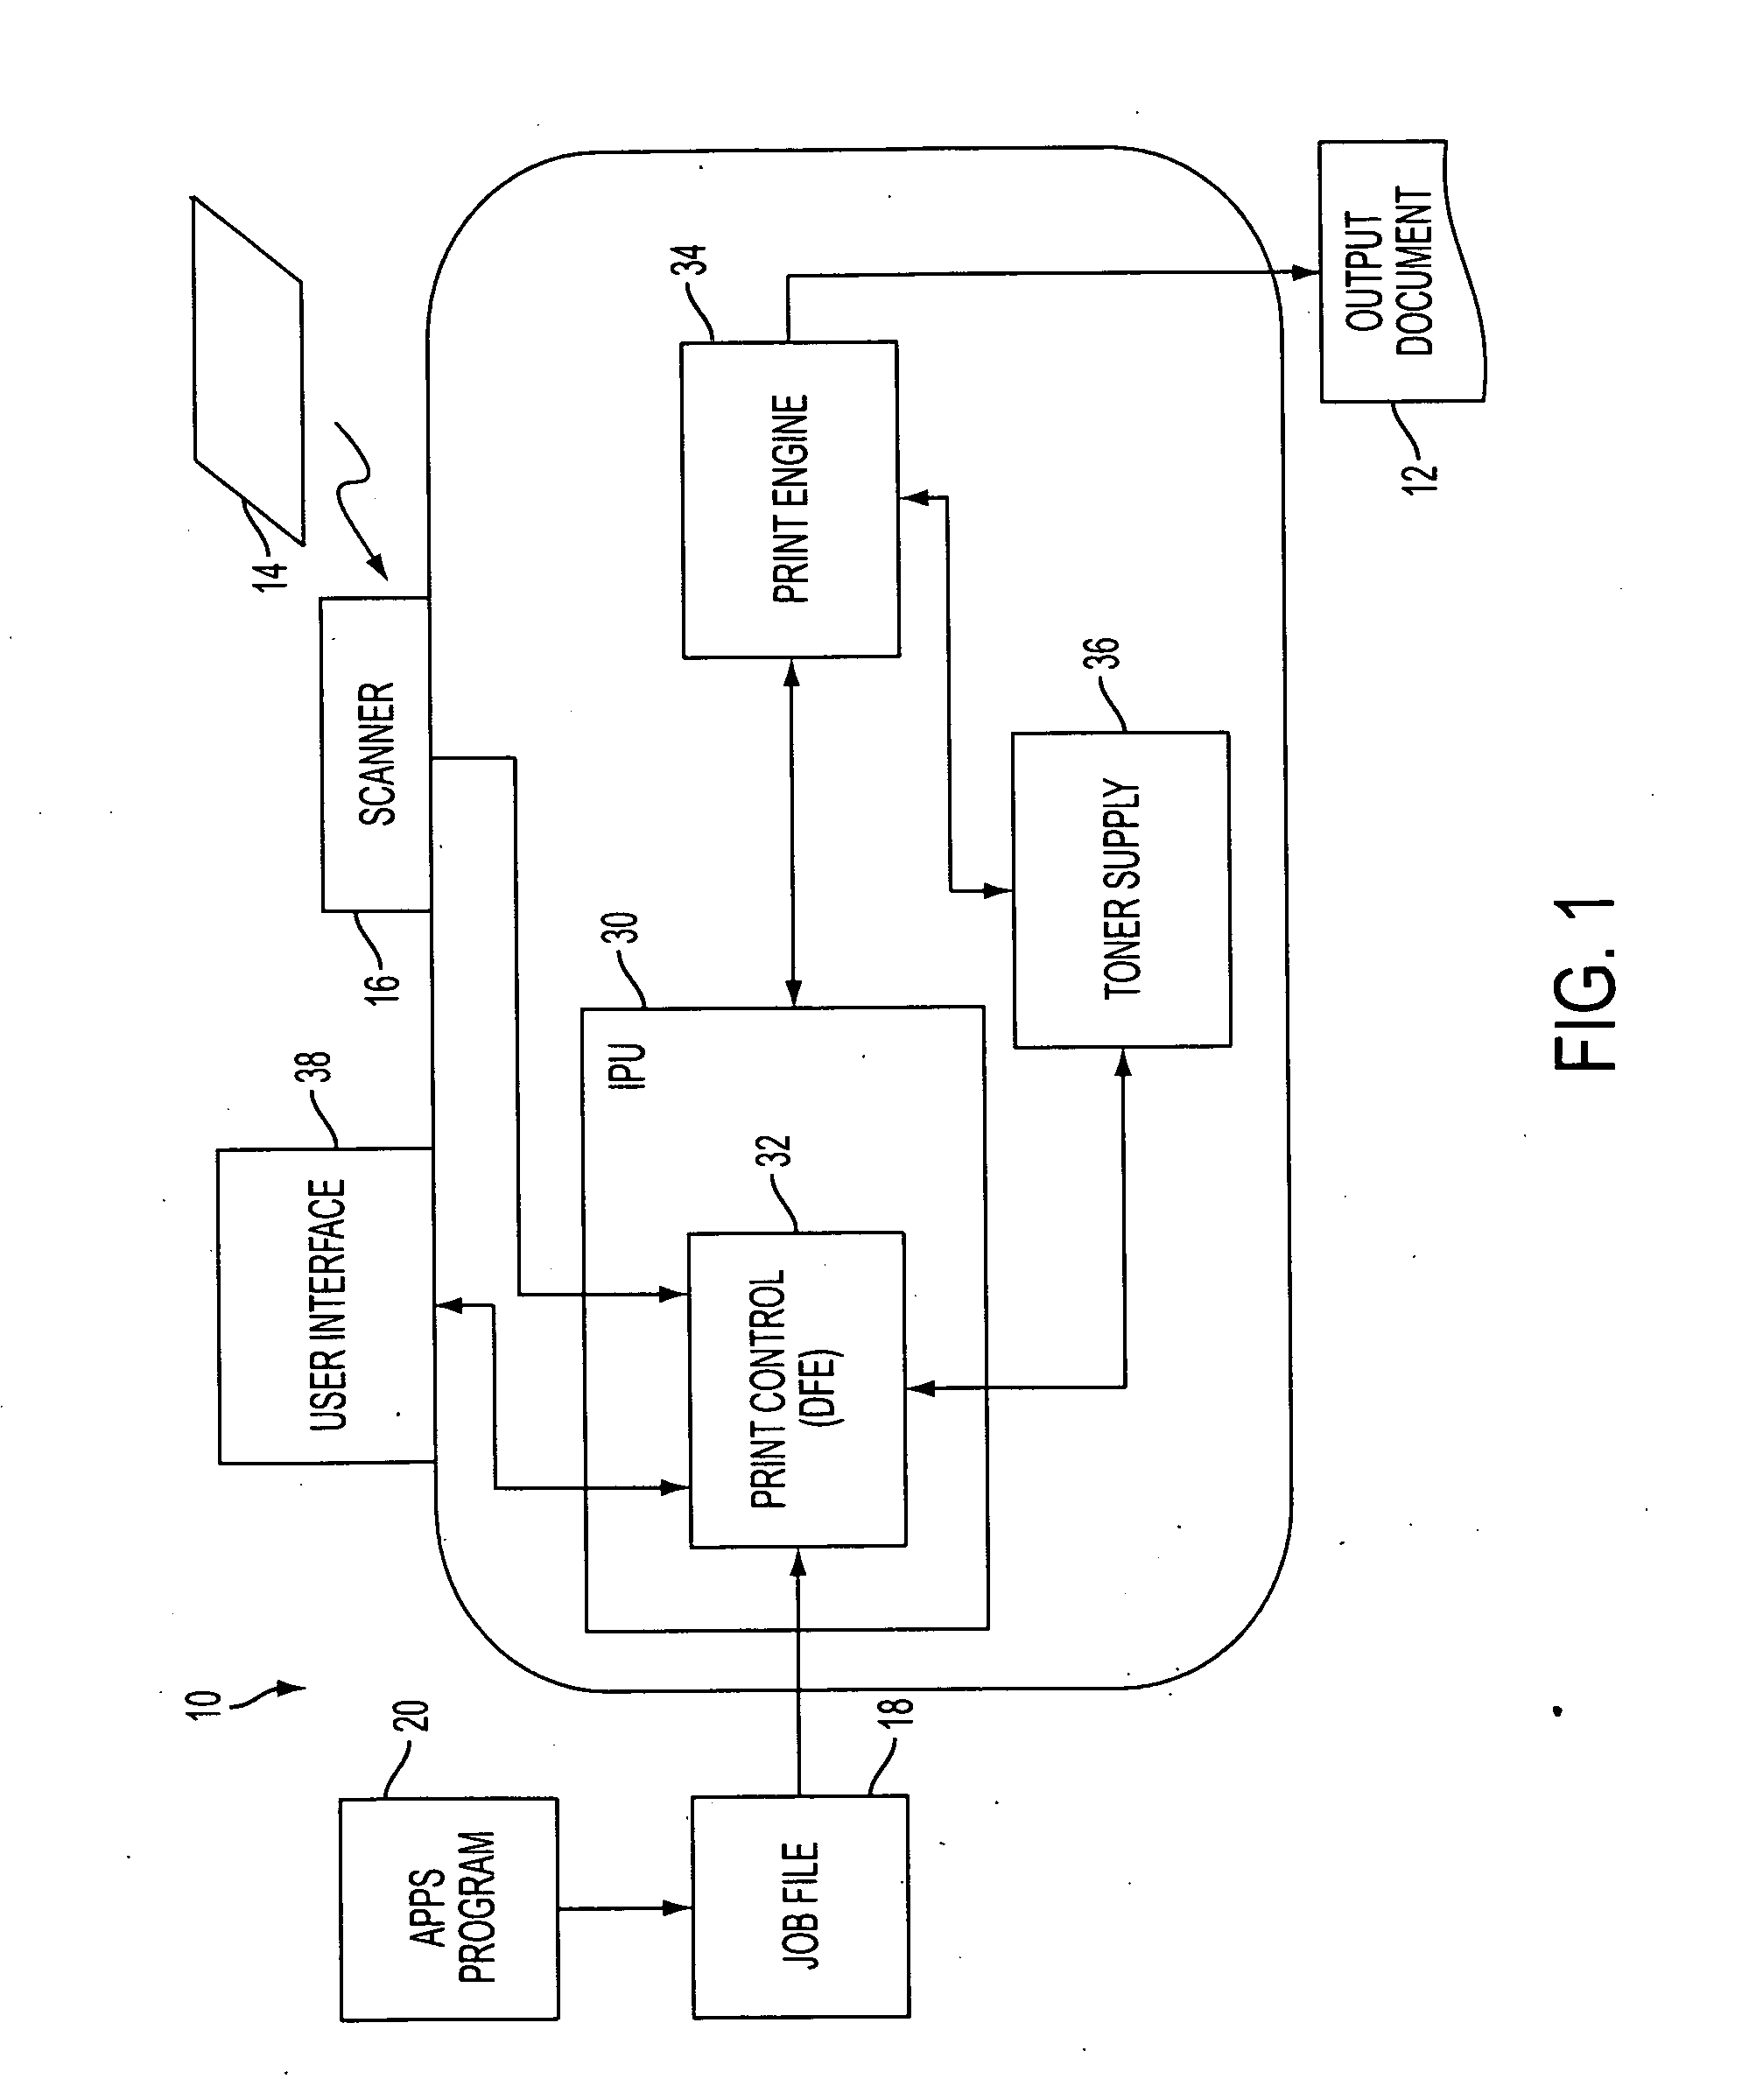 Method and system for improved implementation of maintenance routines in a productive system